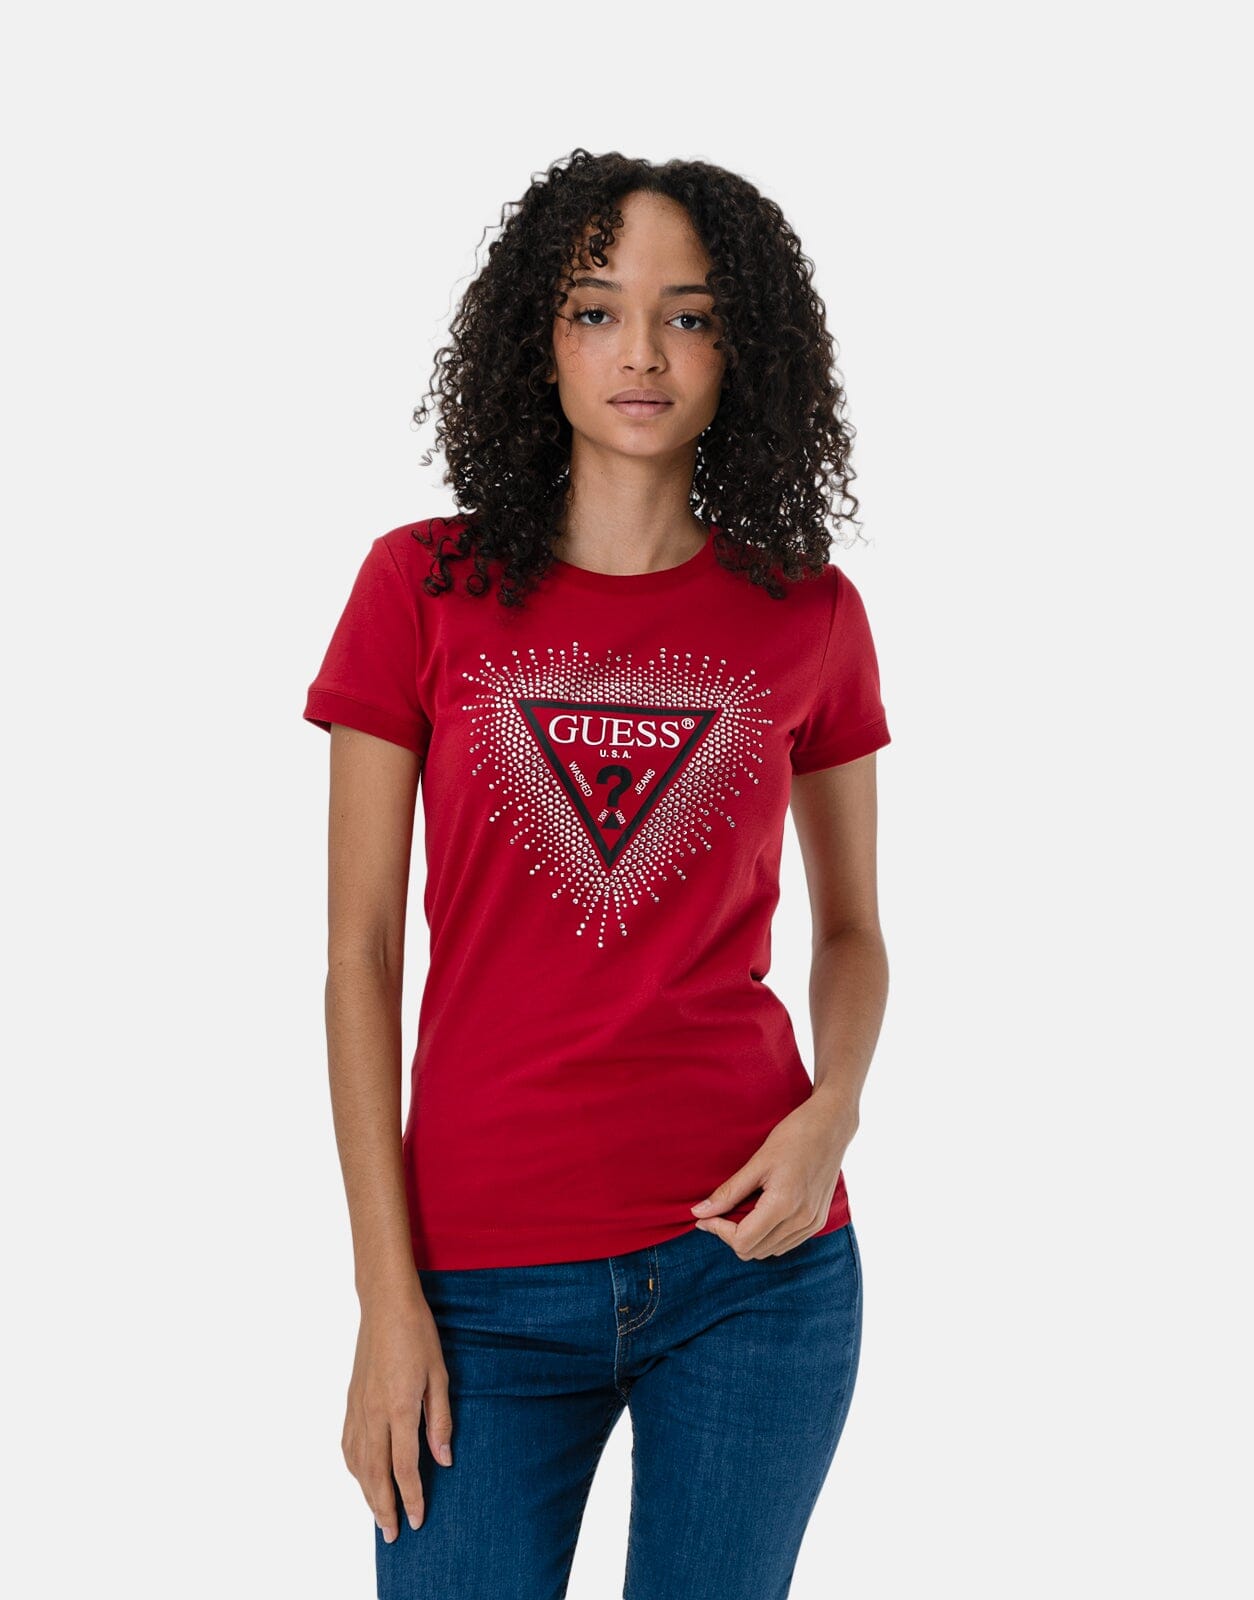 Guess Star Triangle Red T-Shirt - Subwear